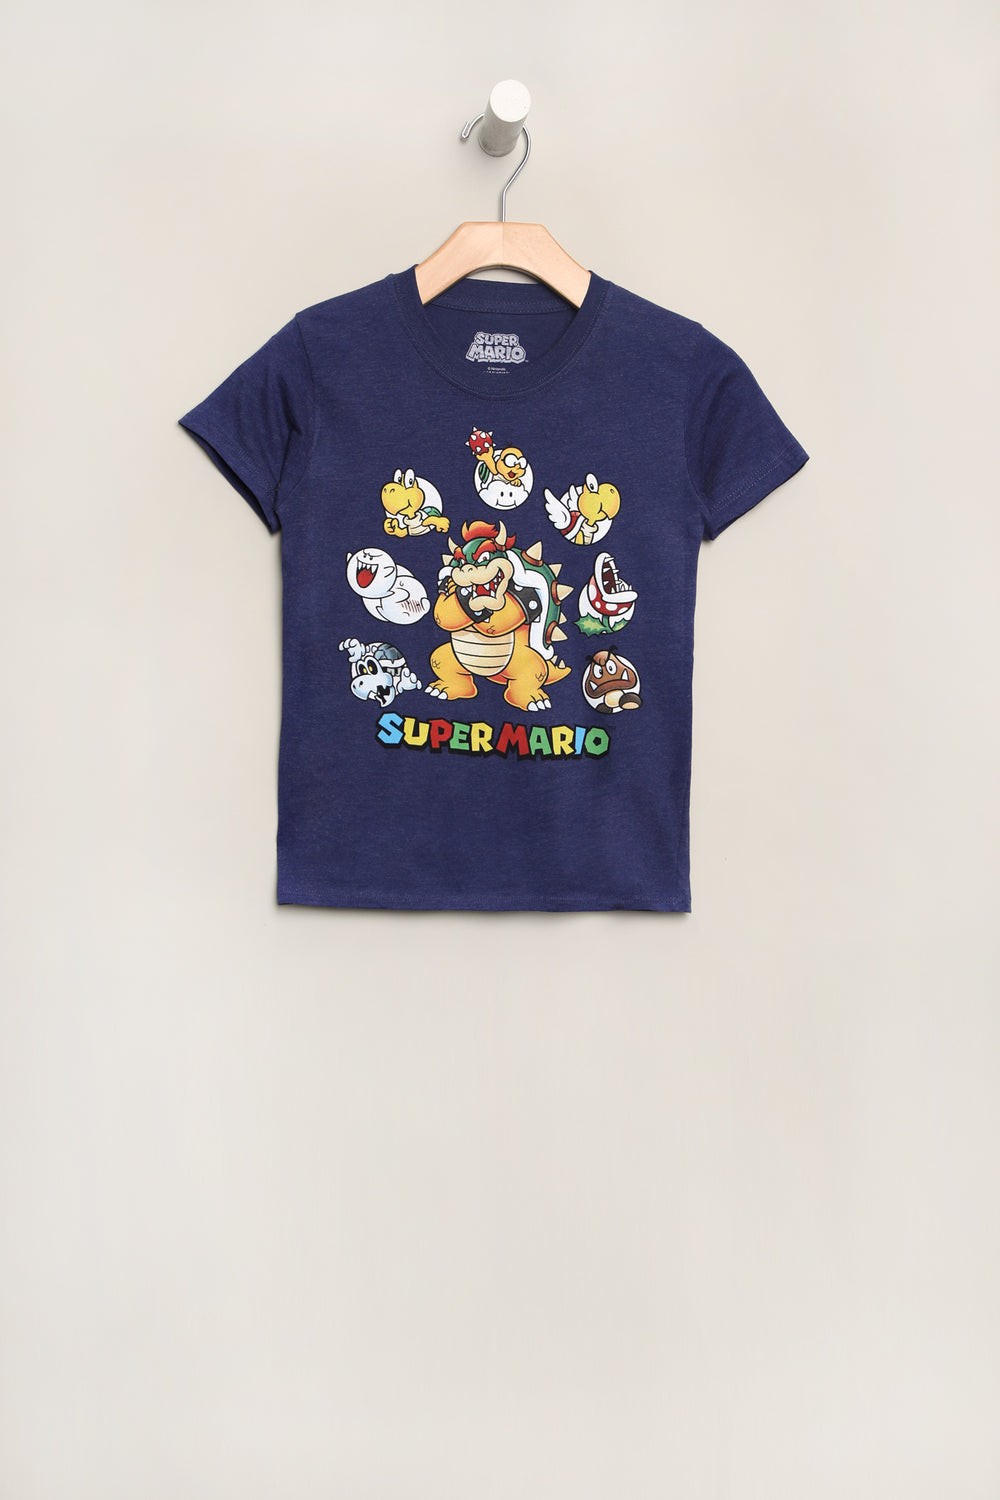 Youth Super Mario Character T-Shirt Youth Super Mario Character T-Shirt